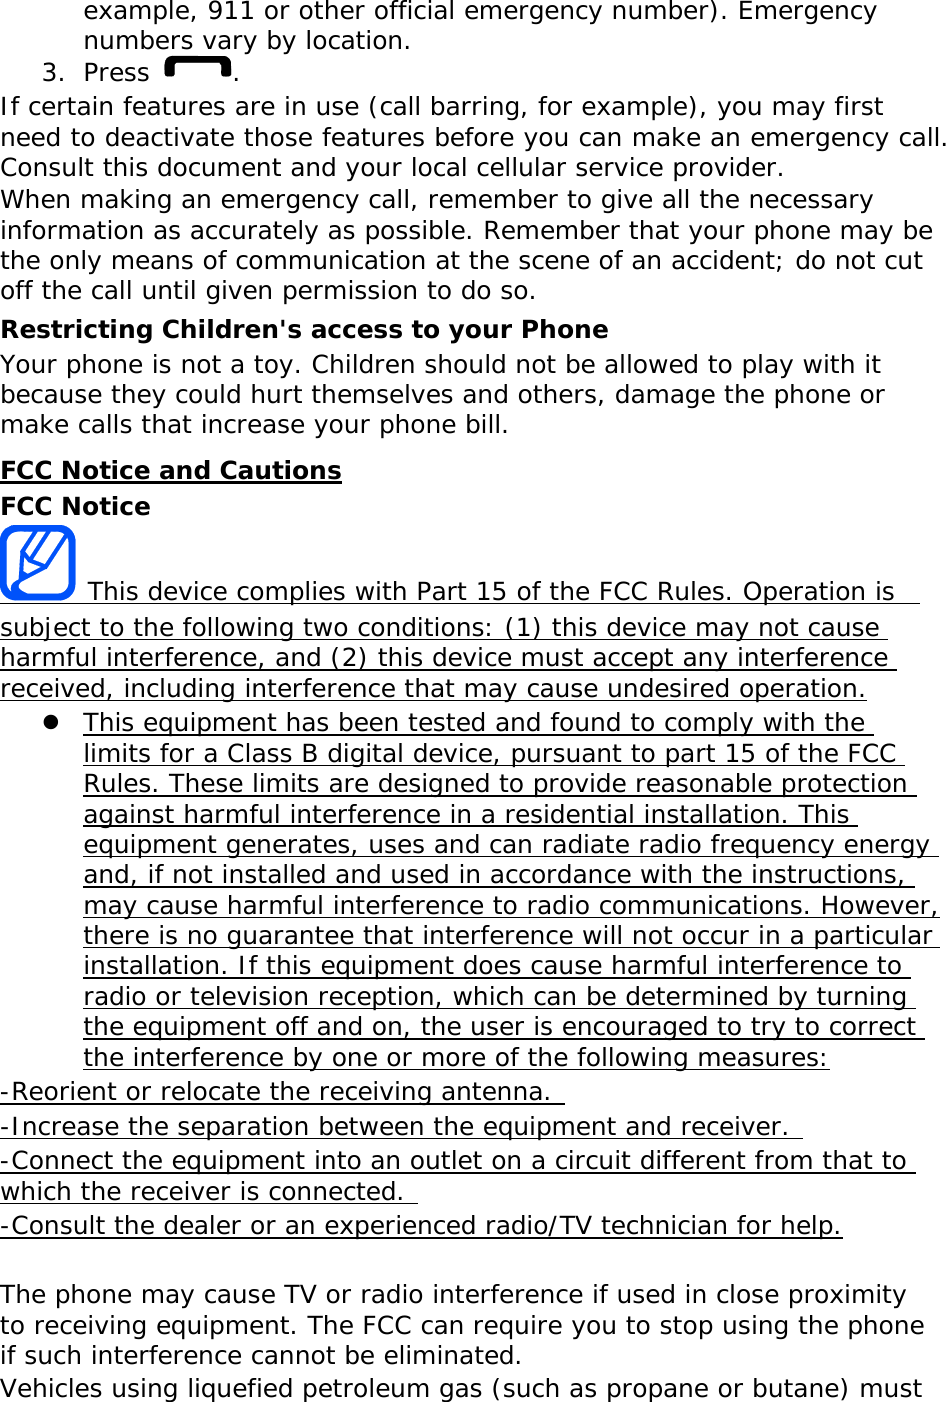 example, 911 or other official emergency number). Emergency numbers vary by location. 3. Press  . If certain features are in use (call barring, for example), you may first need to deactivate those features before you can make an emergency call. Consult this document and your local cellular service provider. When making an emergency call, remember to give all the necessary information as accurately as possible. Remember that your phone may be the only means of communication at the scene of an accident; do not cut off the call until given permission to do so. Restricting Children&apos;s access to your Phone Your phone is not a toy. Children should not be allowed to play with it because they could hurt themselves and others, damage the phone or make calls that increase your phone bill. FCC Notice and Cautions FCC Notice  This device complies with Part 15 of the FCC Rules. Operation is  subject to the following two conditions: (1) this device may not cause harmful interference, and (2) this device must accept any interference received, including interference that may cause undesired operation. z This equipment has been tested and found to comply with the limits for a Class B digital device, pursuant to part 15 of the FCC Rules. These limits are designed to provide reasonable protection against harmful interference in a residential installation. This equipment generates, uses and can radiate radio frequency energy and, if not installed and used in accordance with the instructions, may cause harmful interference to radio communications. However, there is no guarantee that interference will not occur in a particular installation. If this equipment does cause harmful interference to radio or television reception, which can be determined by turning the equipment off and on, the user is encouraged to try to correct the interference by one or more of the following measures: -Reorient or relocate the receiving antenna.  -Increase the separation between the equipment and receiver.  -Connect the equipment into an outlet on a circuit different from that to which the receiver is connected.  -Consult the dealer or an experienced radio/TV technician for help.  The phone may cause TV or radio interference if used in close proximity to receiving equipment. The FCC can require you to stop using the phone if such interference cannot be eliminated. Vehicles using liquefied petroleum gas (such as propane or butane) must 